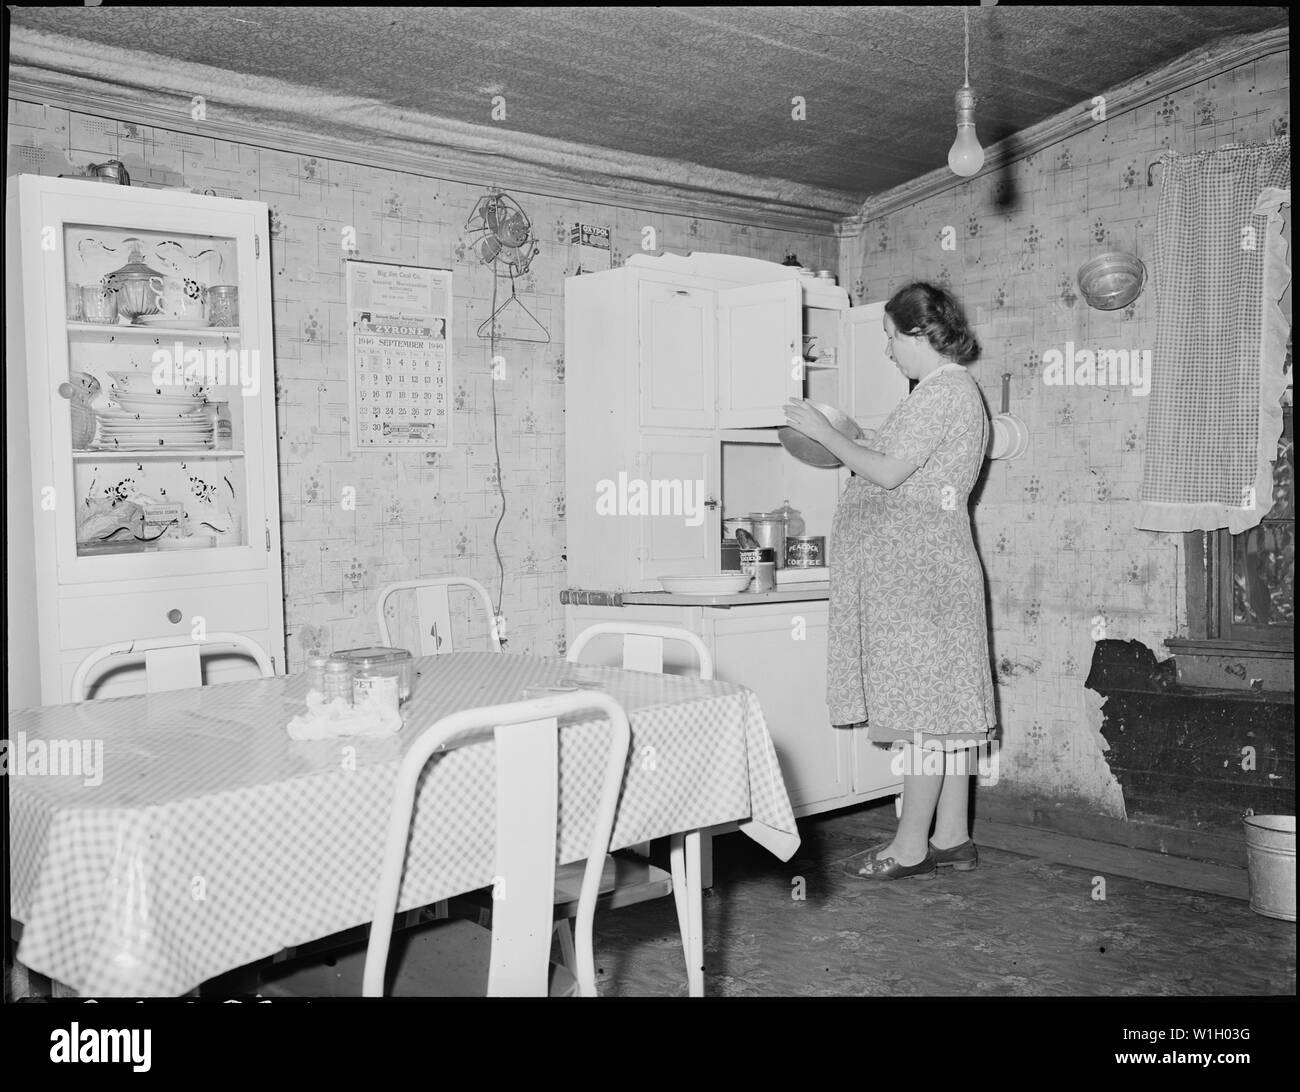 Mrs. Floyd Miller, wife of a miner, in the kitchen of their three room house for which they pay $6 monthly. They pay $3 monthly for electricity and have an iron, radio, washing machine, and three drops. Big Jim Coal Company, Big Jim Mine, Blanche, Bell County, Kentucky. Stock Photo